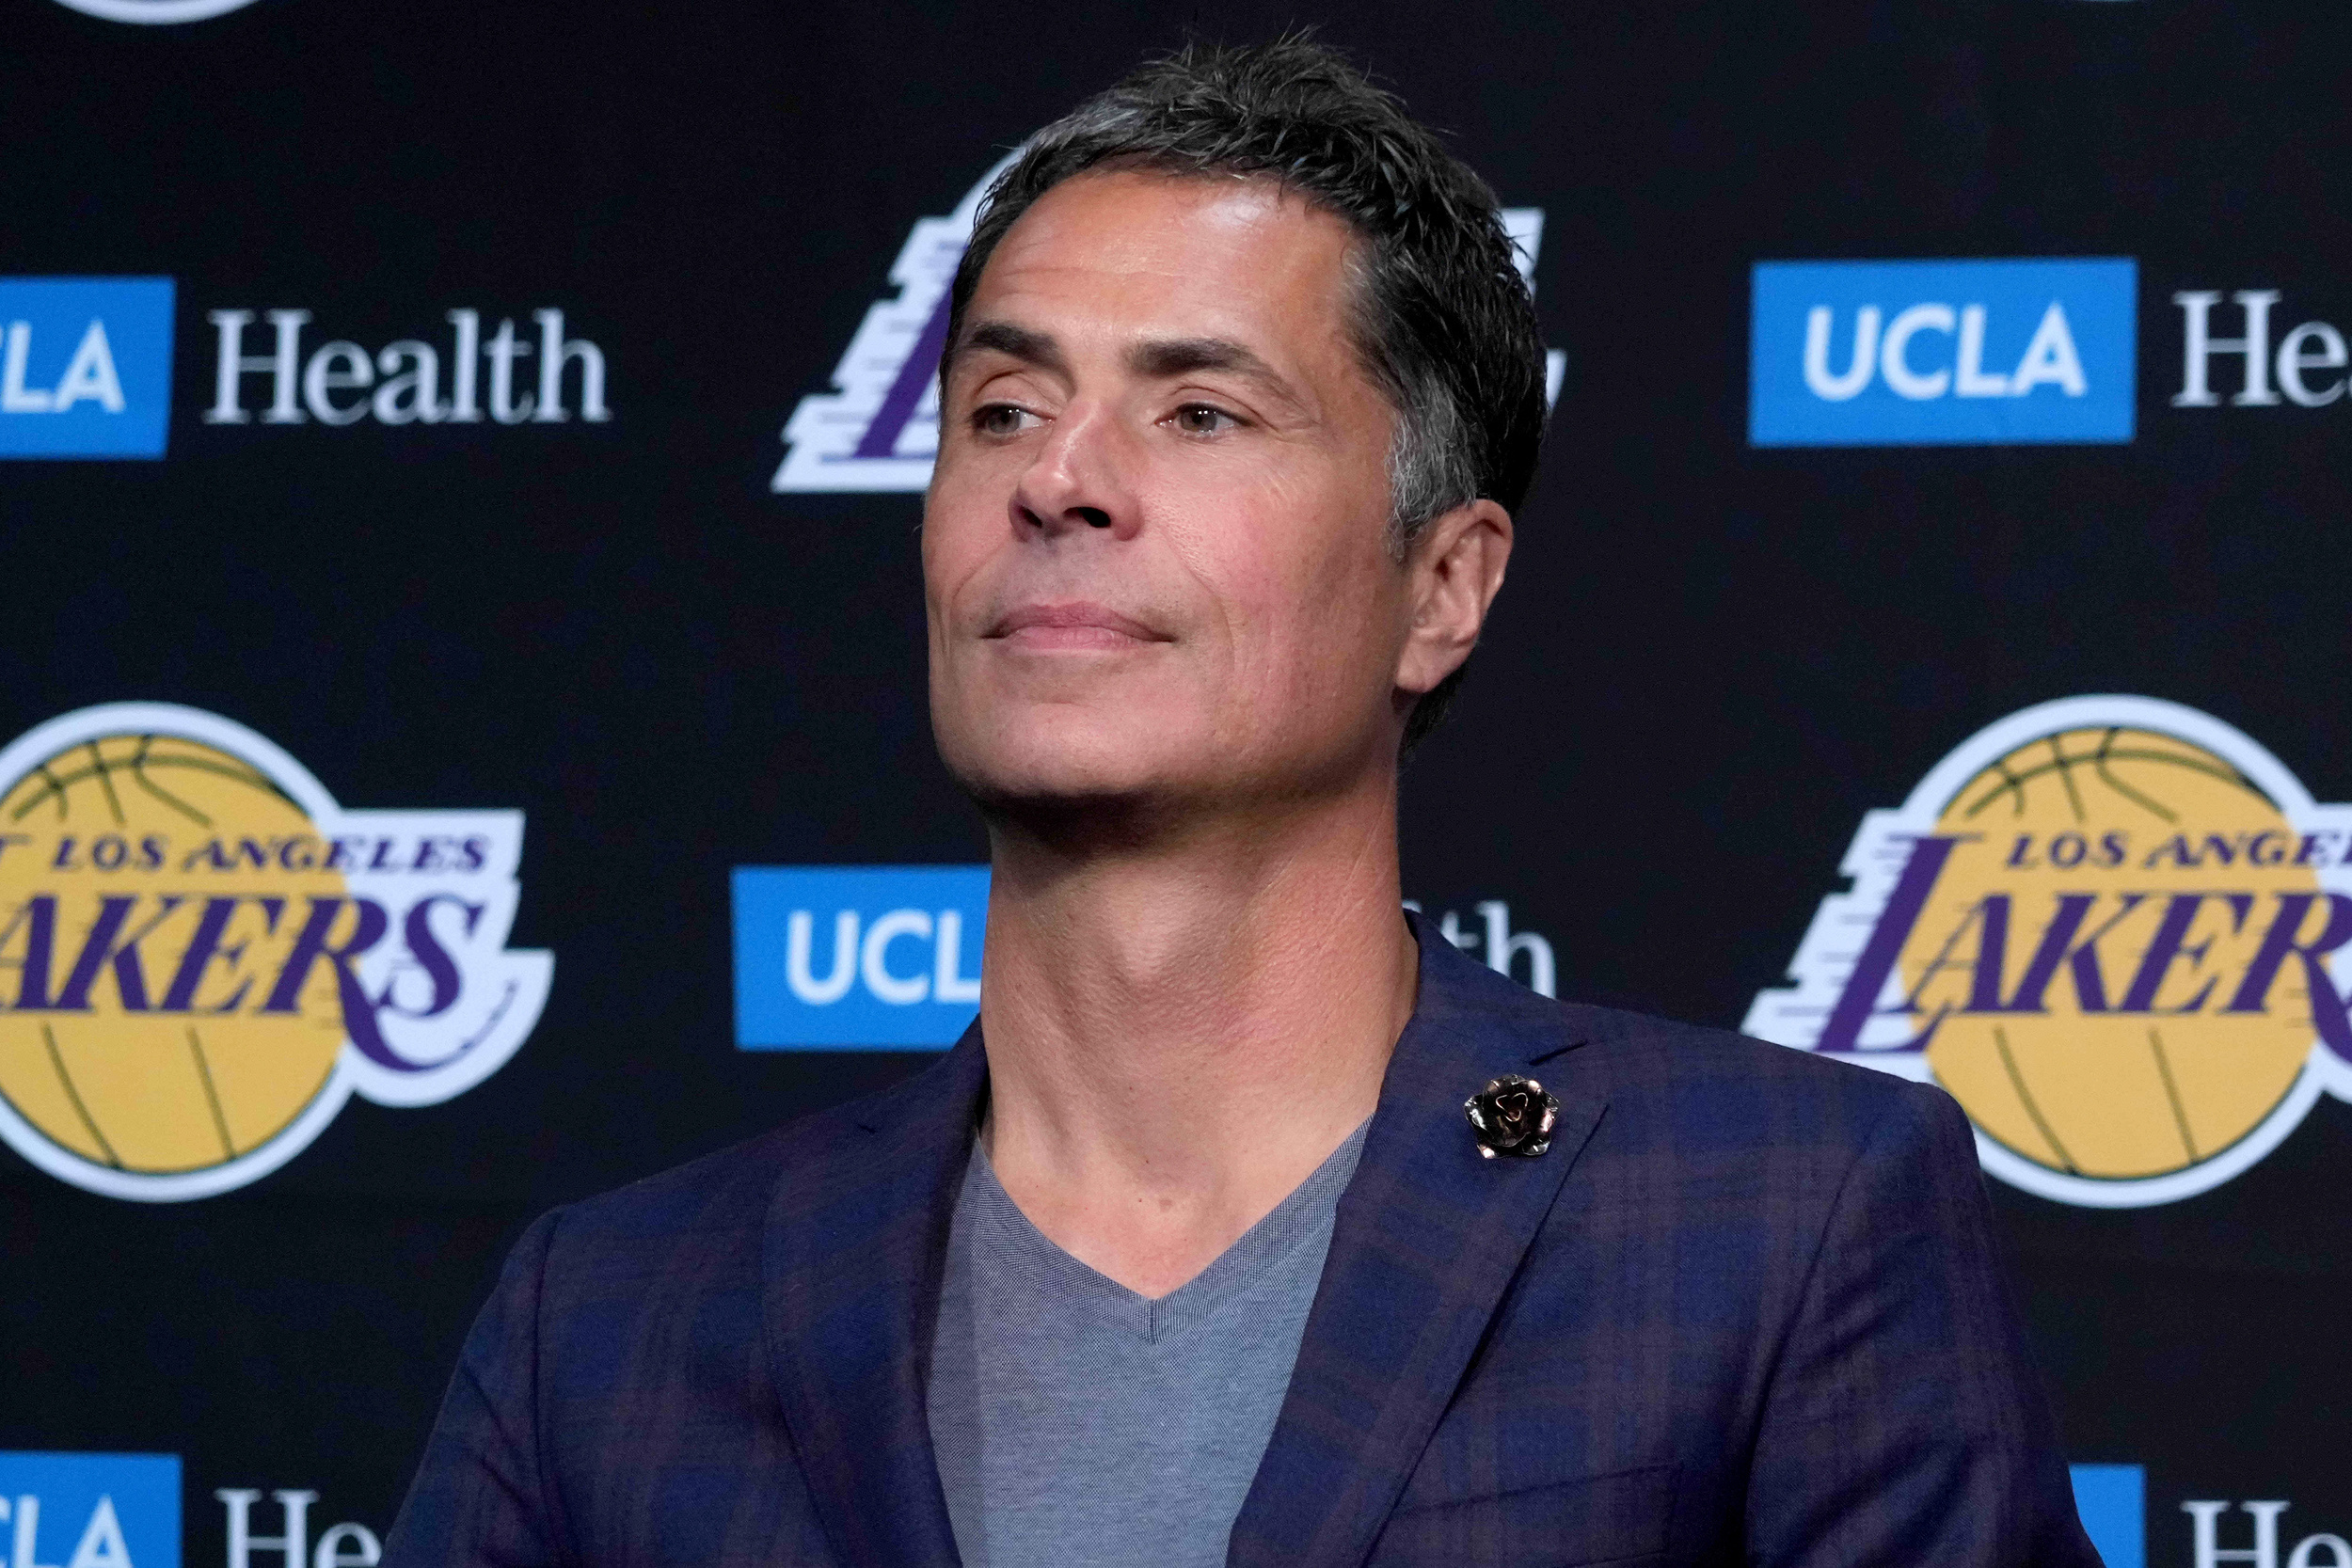 lakers 'low-ball' offers could cost them top coaching candidates